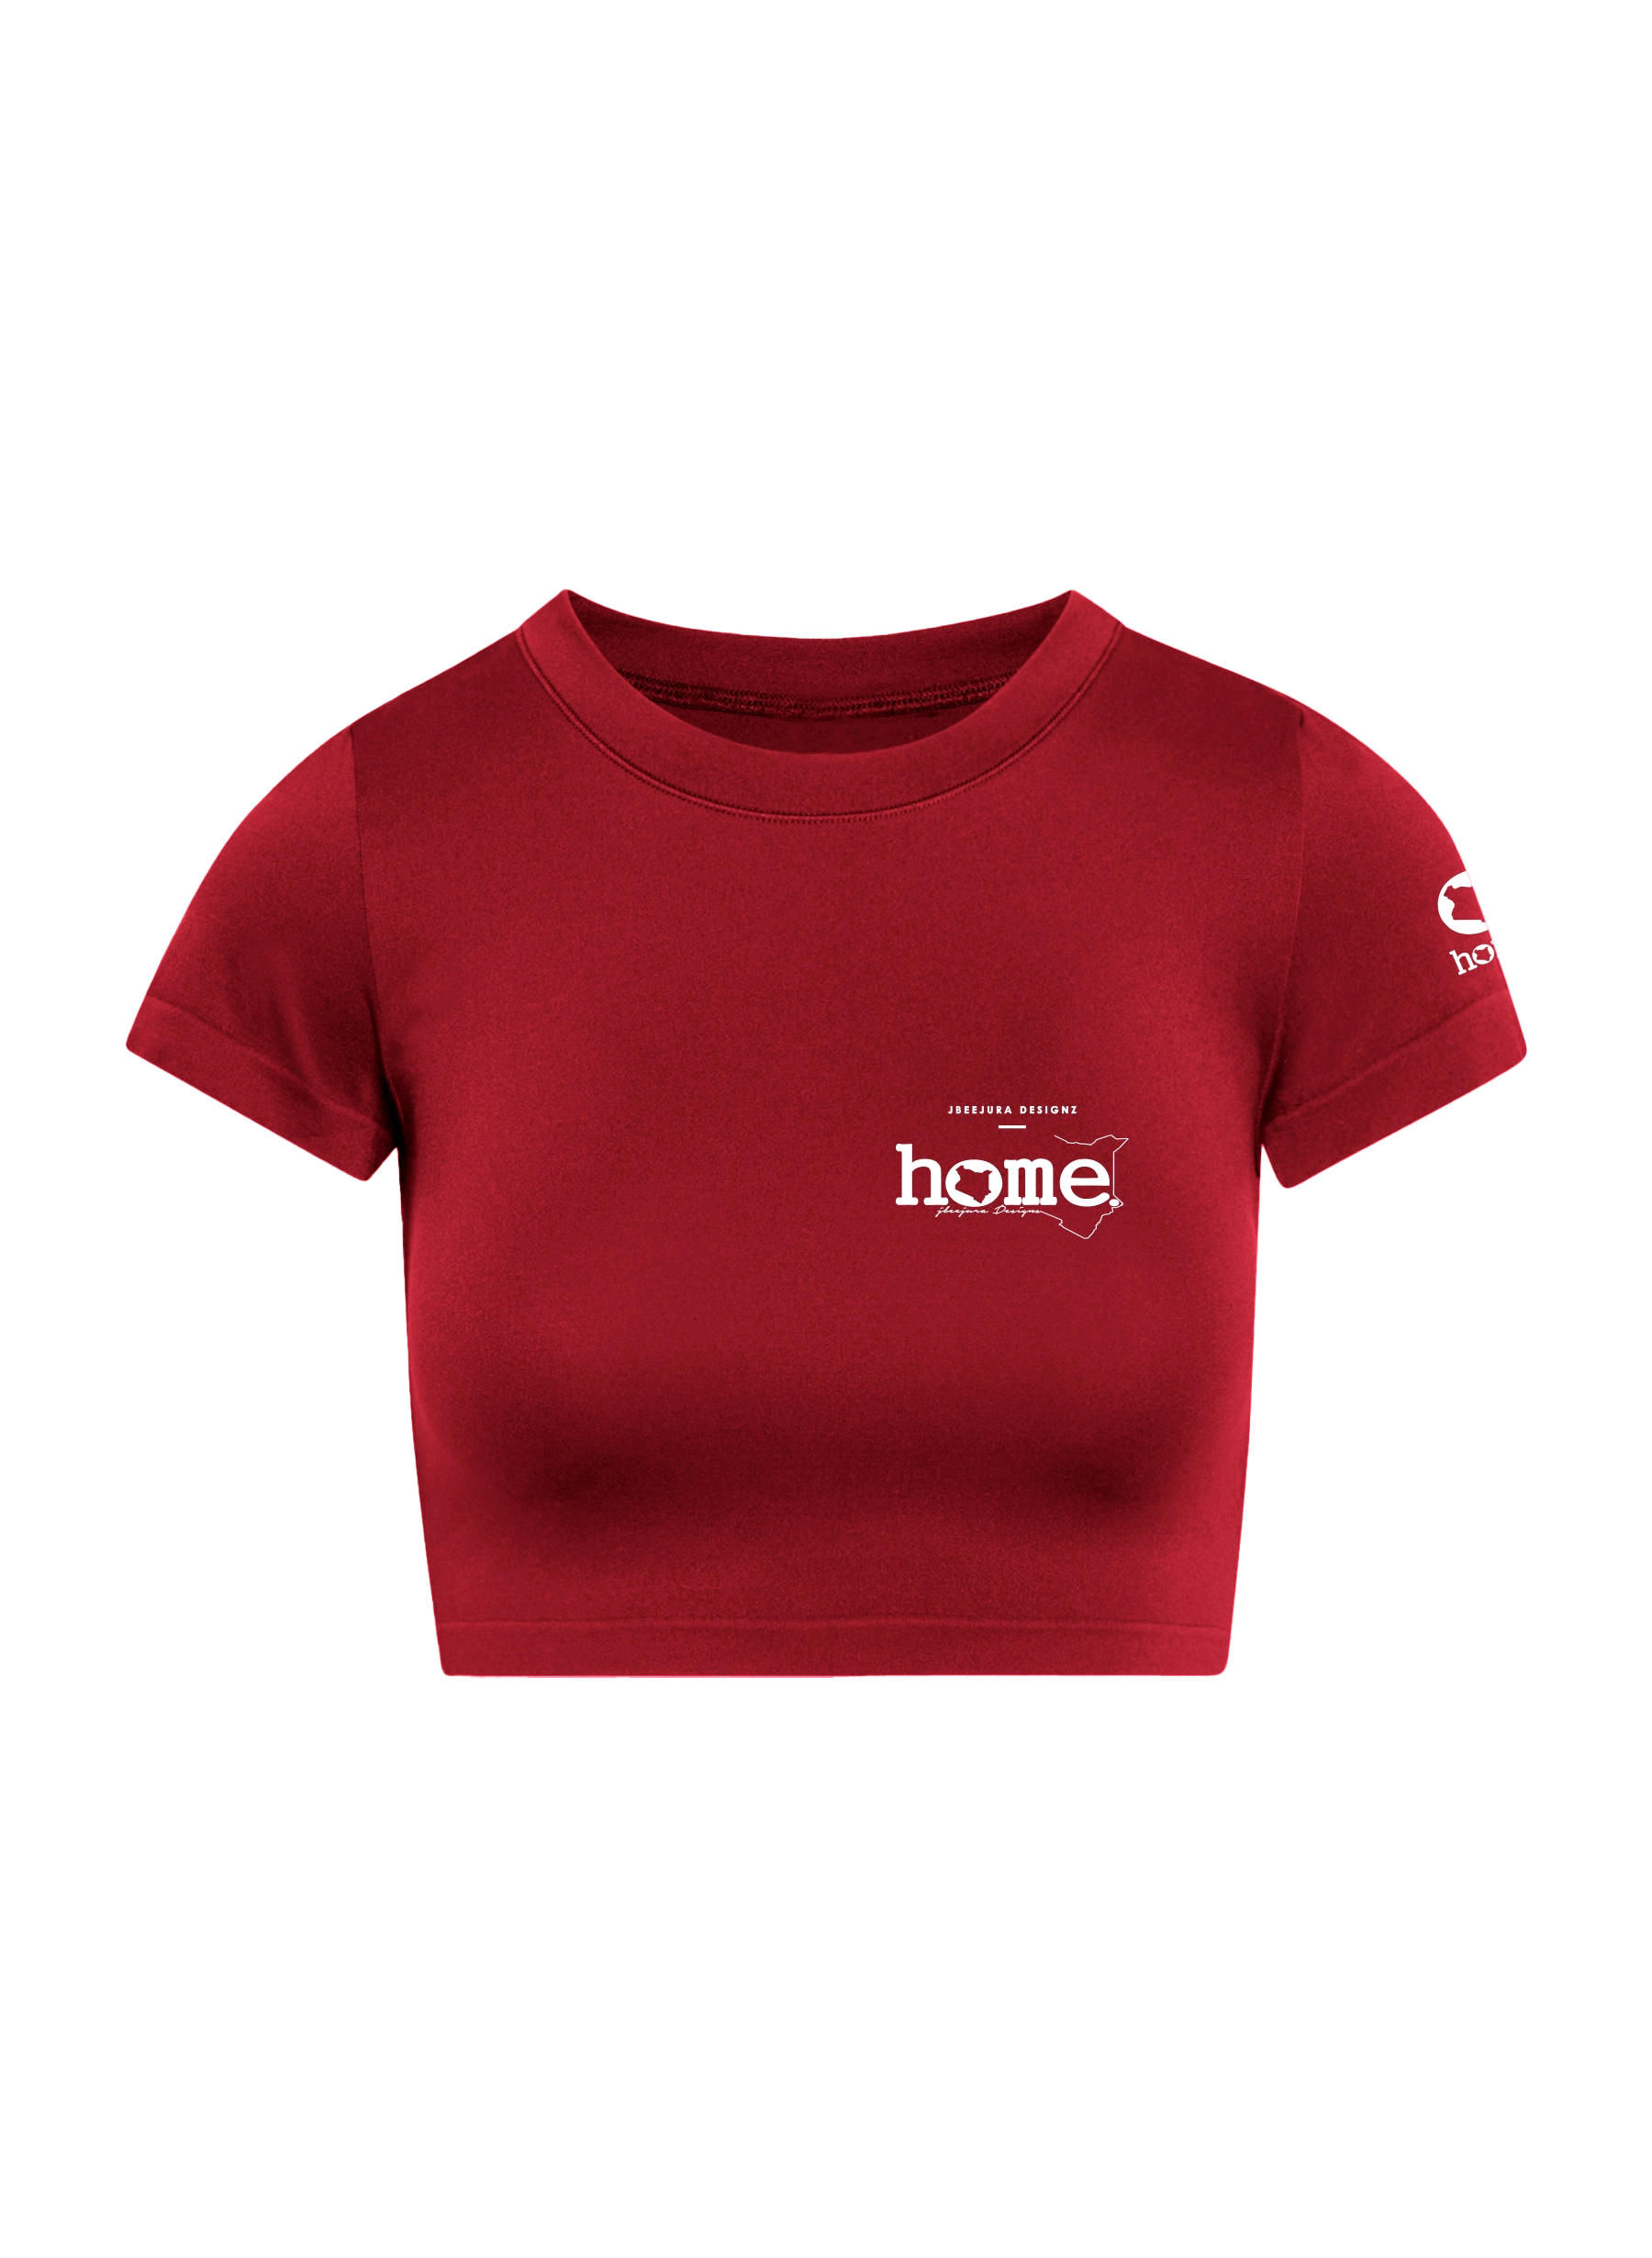 home_254 SHORT SLEEVED MAROON RED CROPPED ARIA TEE WITH A WHITE 3D WORDS PRINT – COTTON PLUS FABRIC